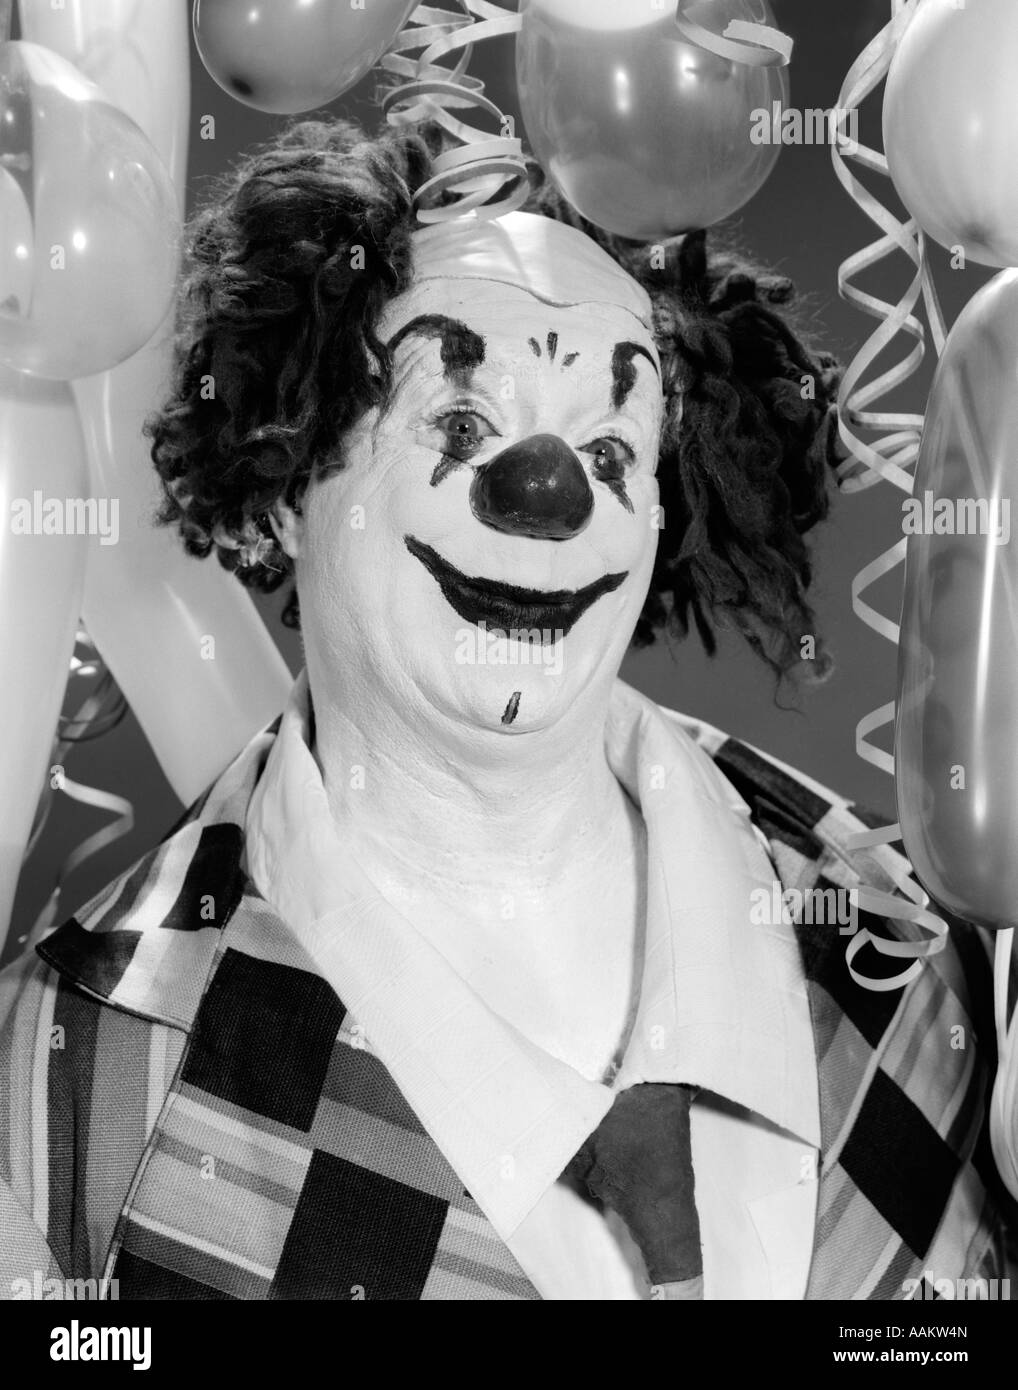 1960s PORTRAIT WHITEFACE CLOWN IN FULL COSTUME SURROUNDED BY BALLOONS LOOKING AT CAMERA Stock Photo